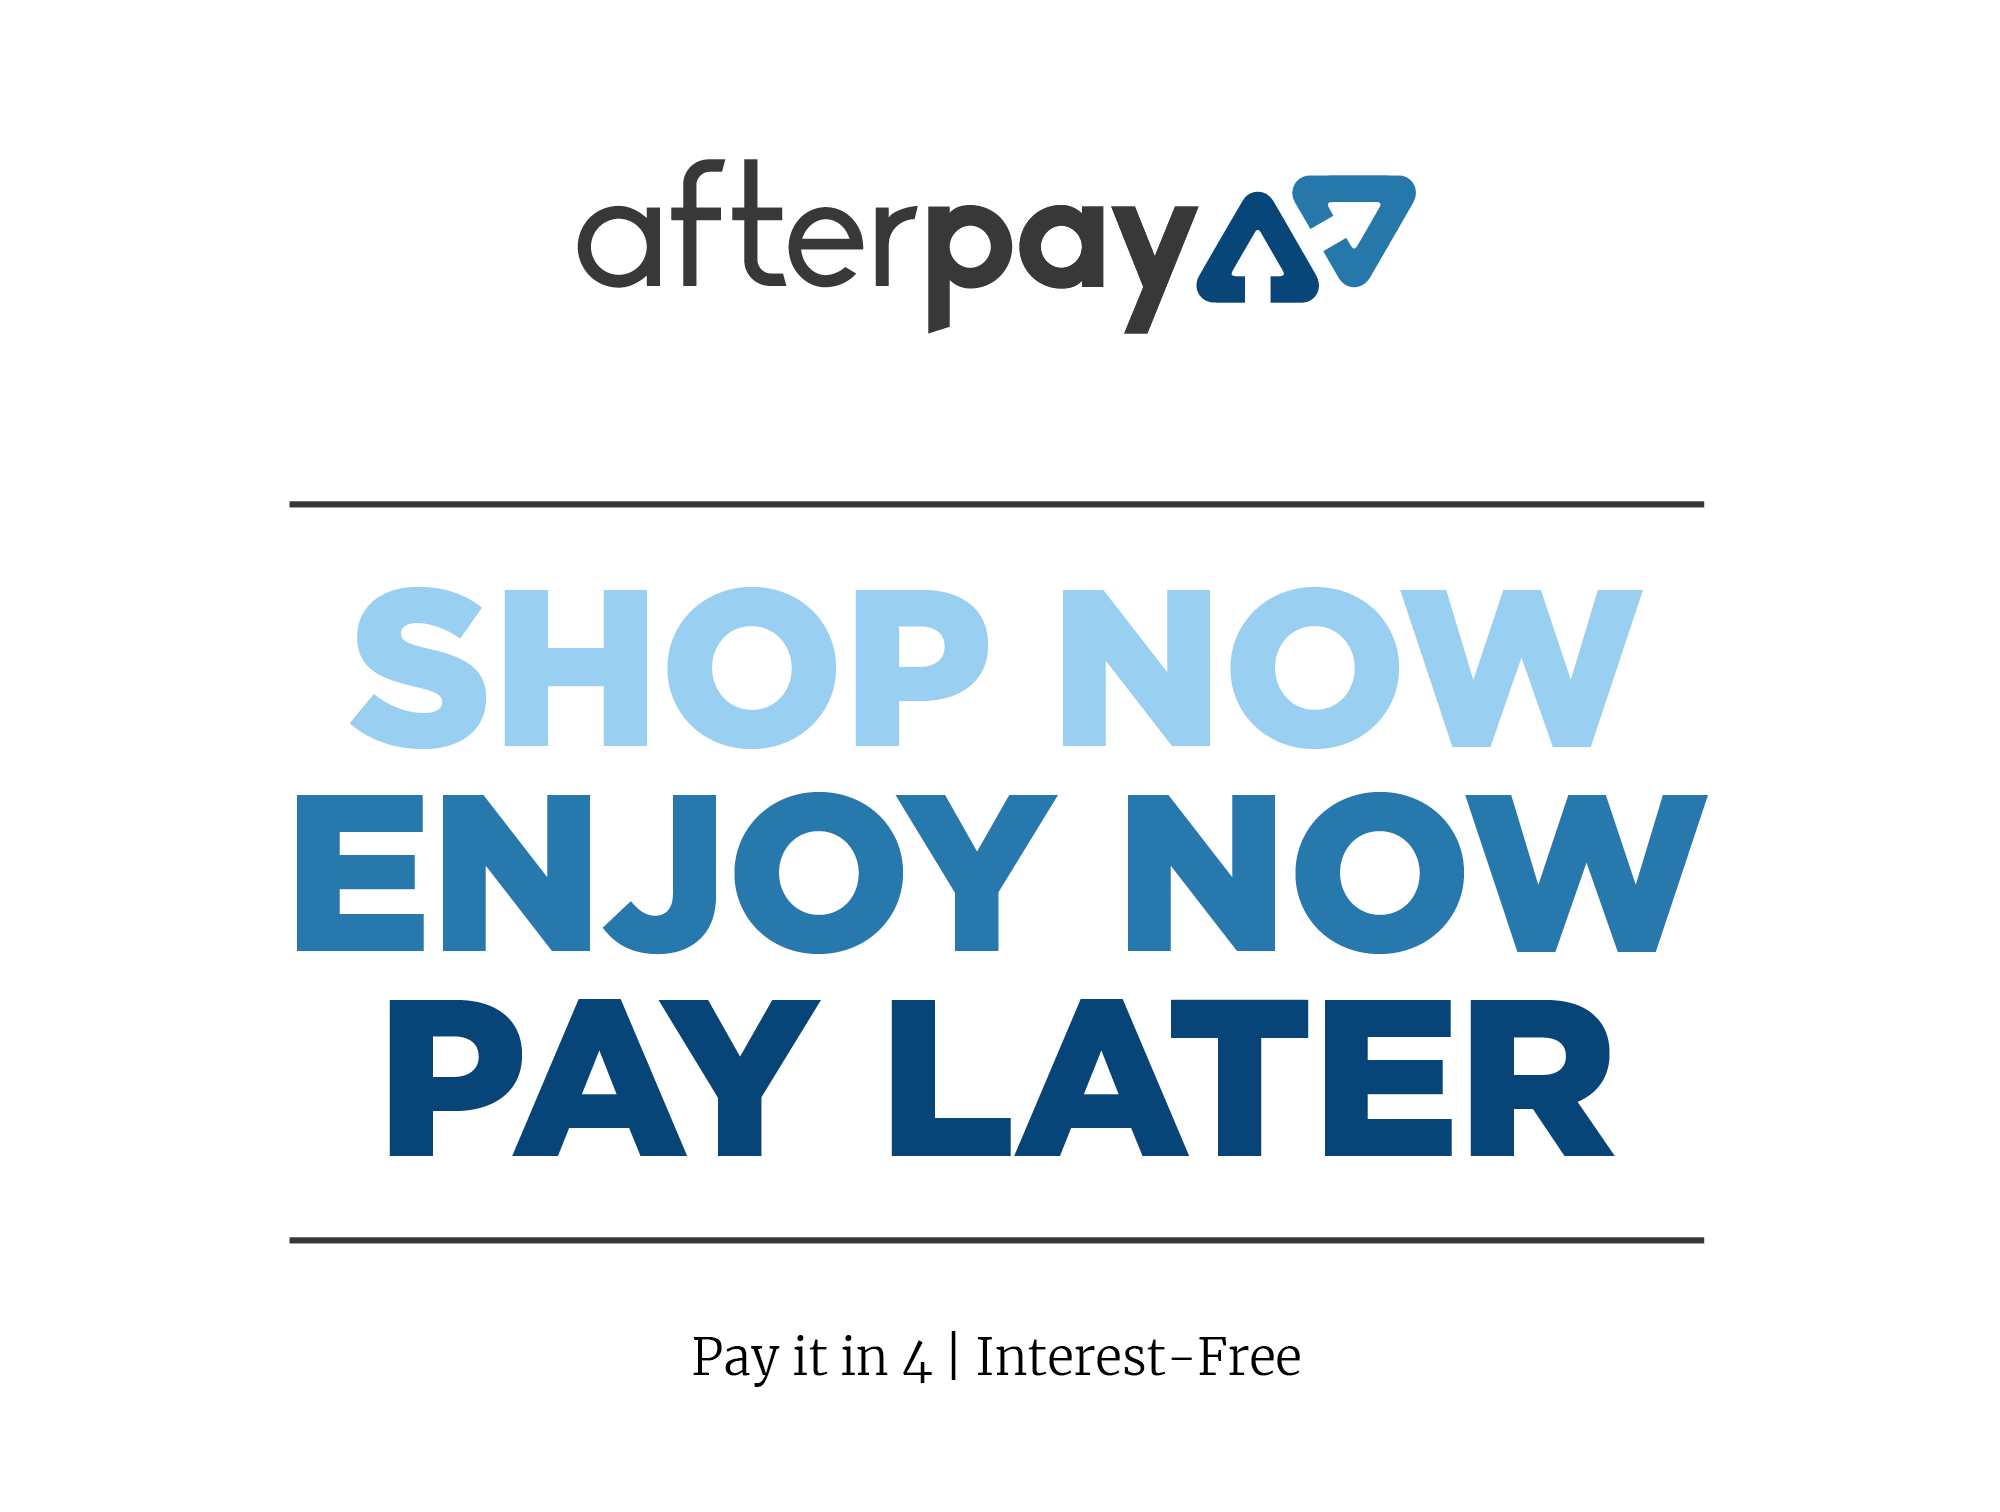 Afterpay wants to expand crypto services, after 